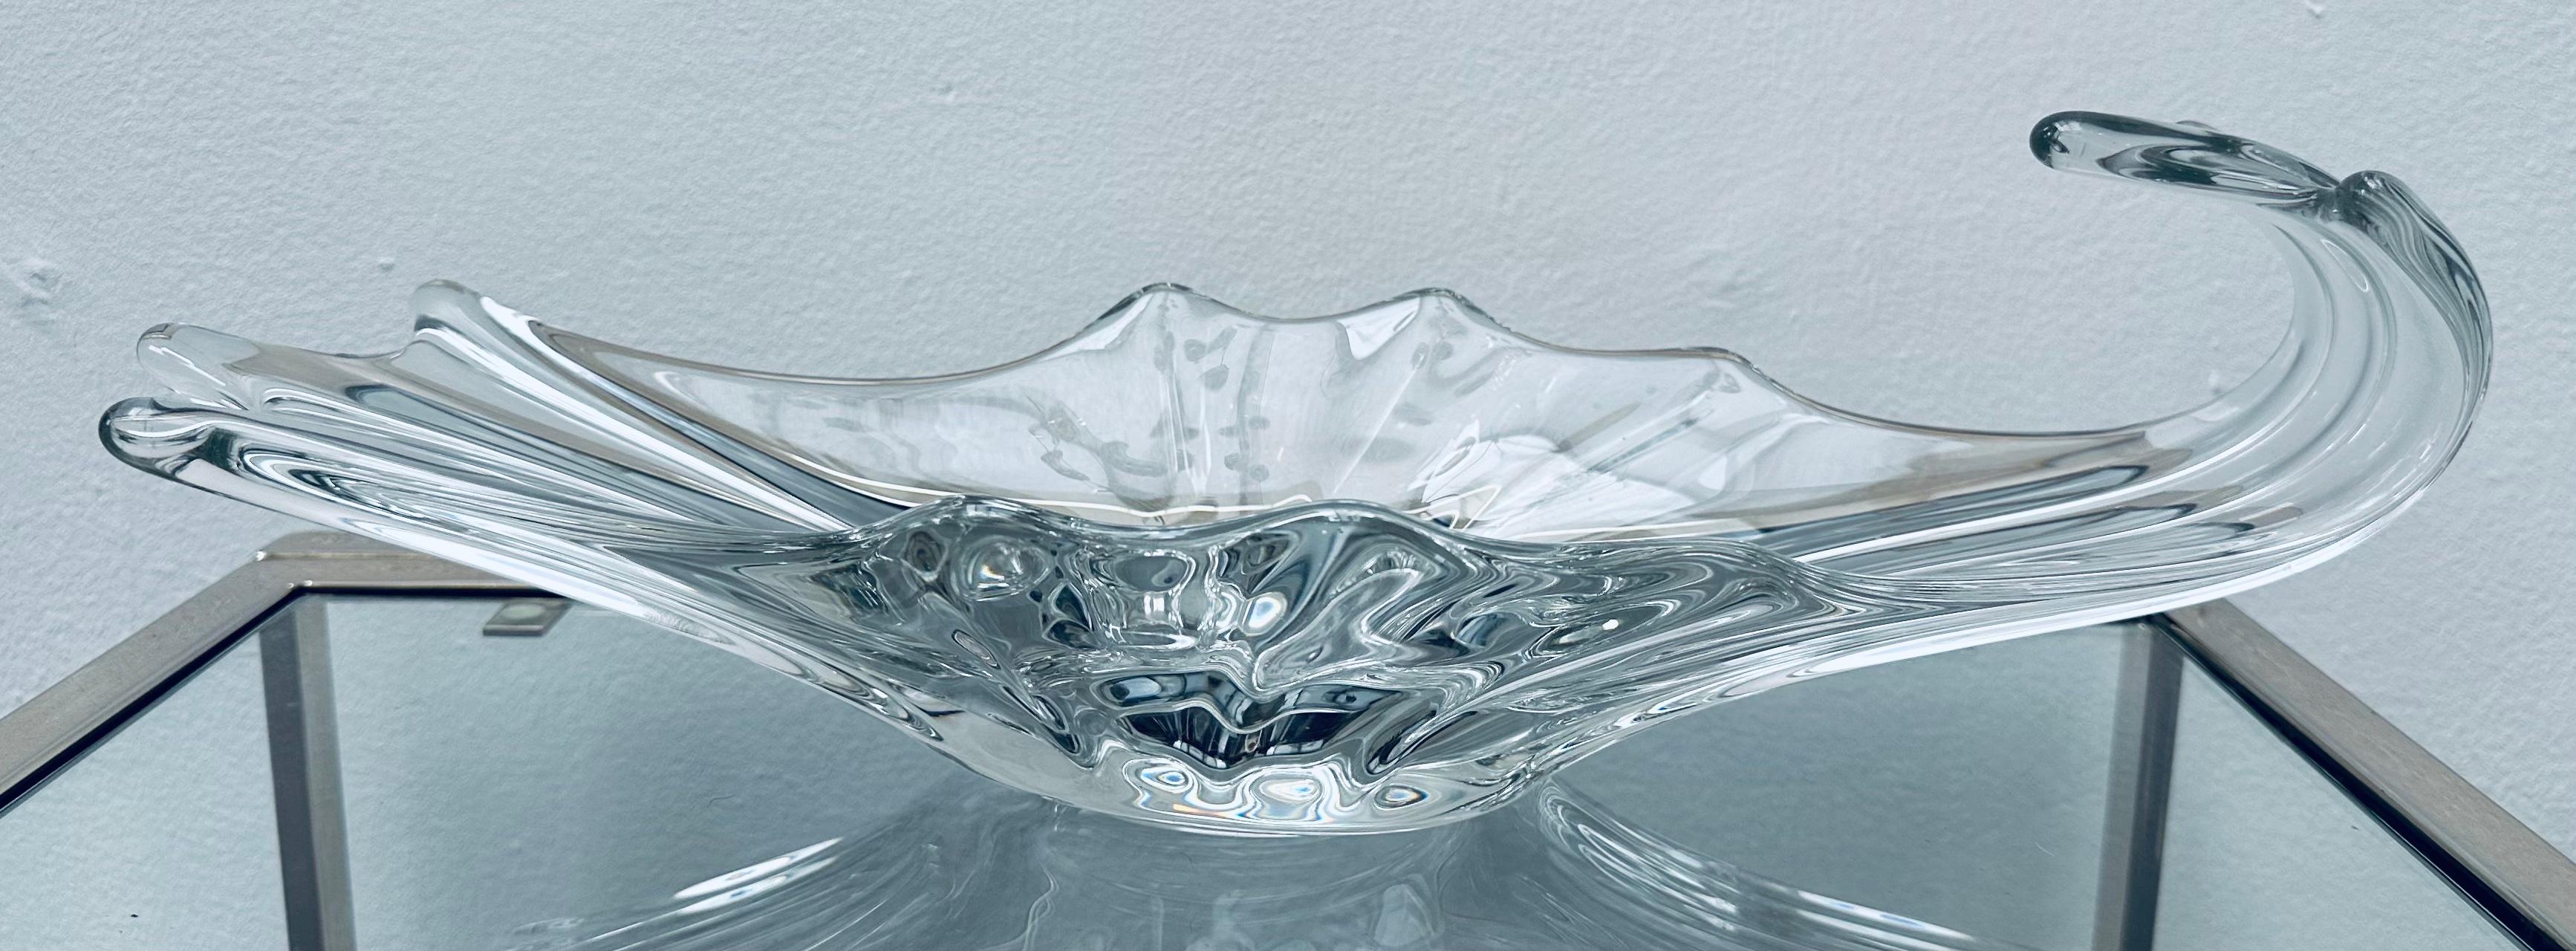 1950s French Art Glass fruit bowl centrepiece crystal glass bowl. The asymmetrical clear crystal glass has a shell shaped form on a three sides and a 'tidal wave' curled design on the other which makes it easy to carry. The smooth curves and